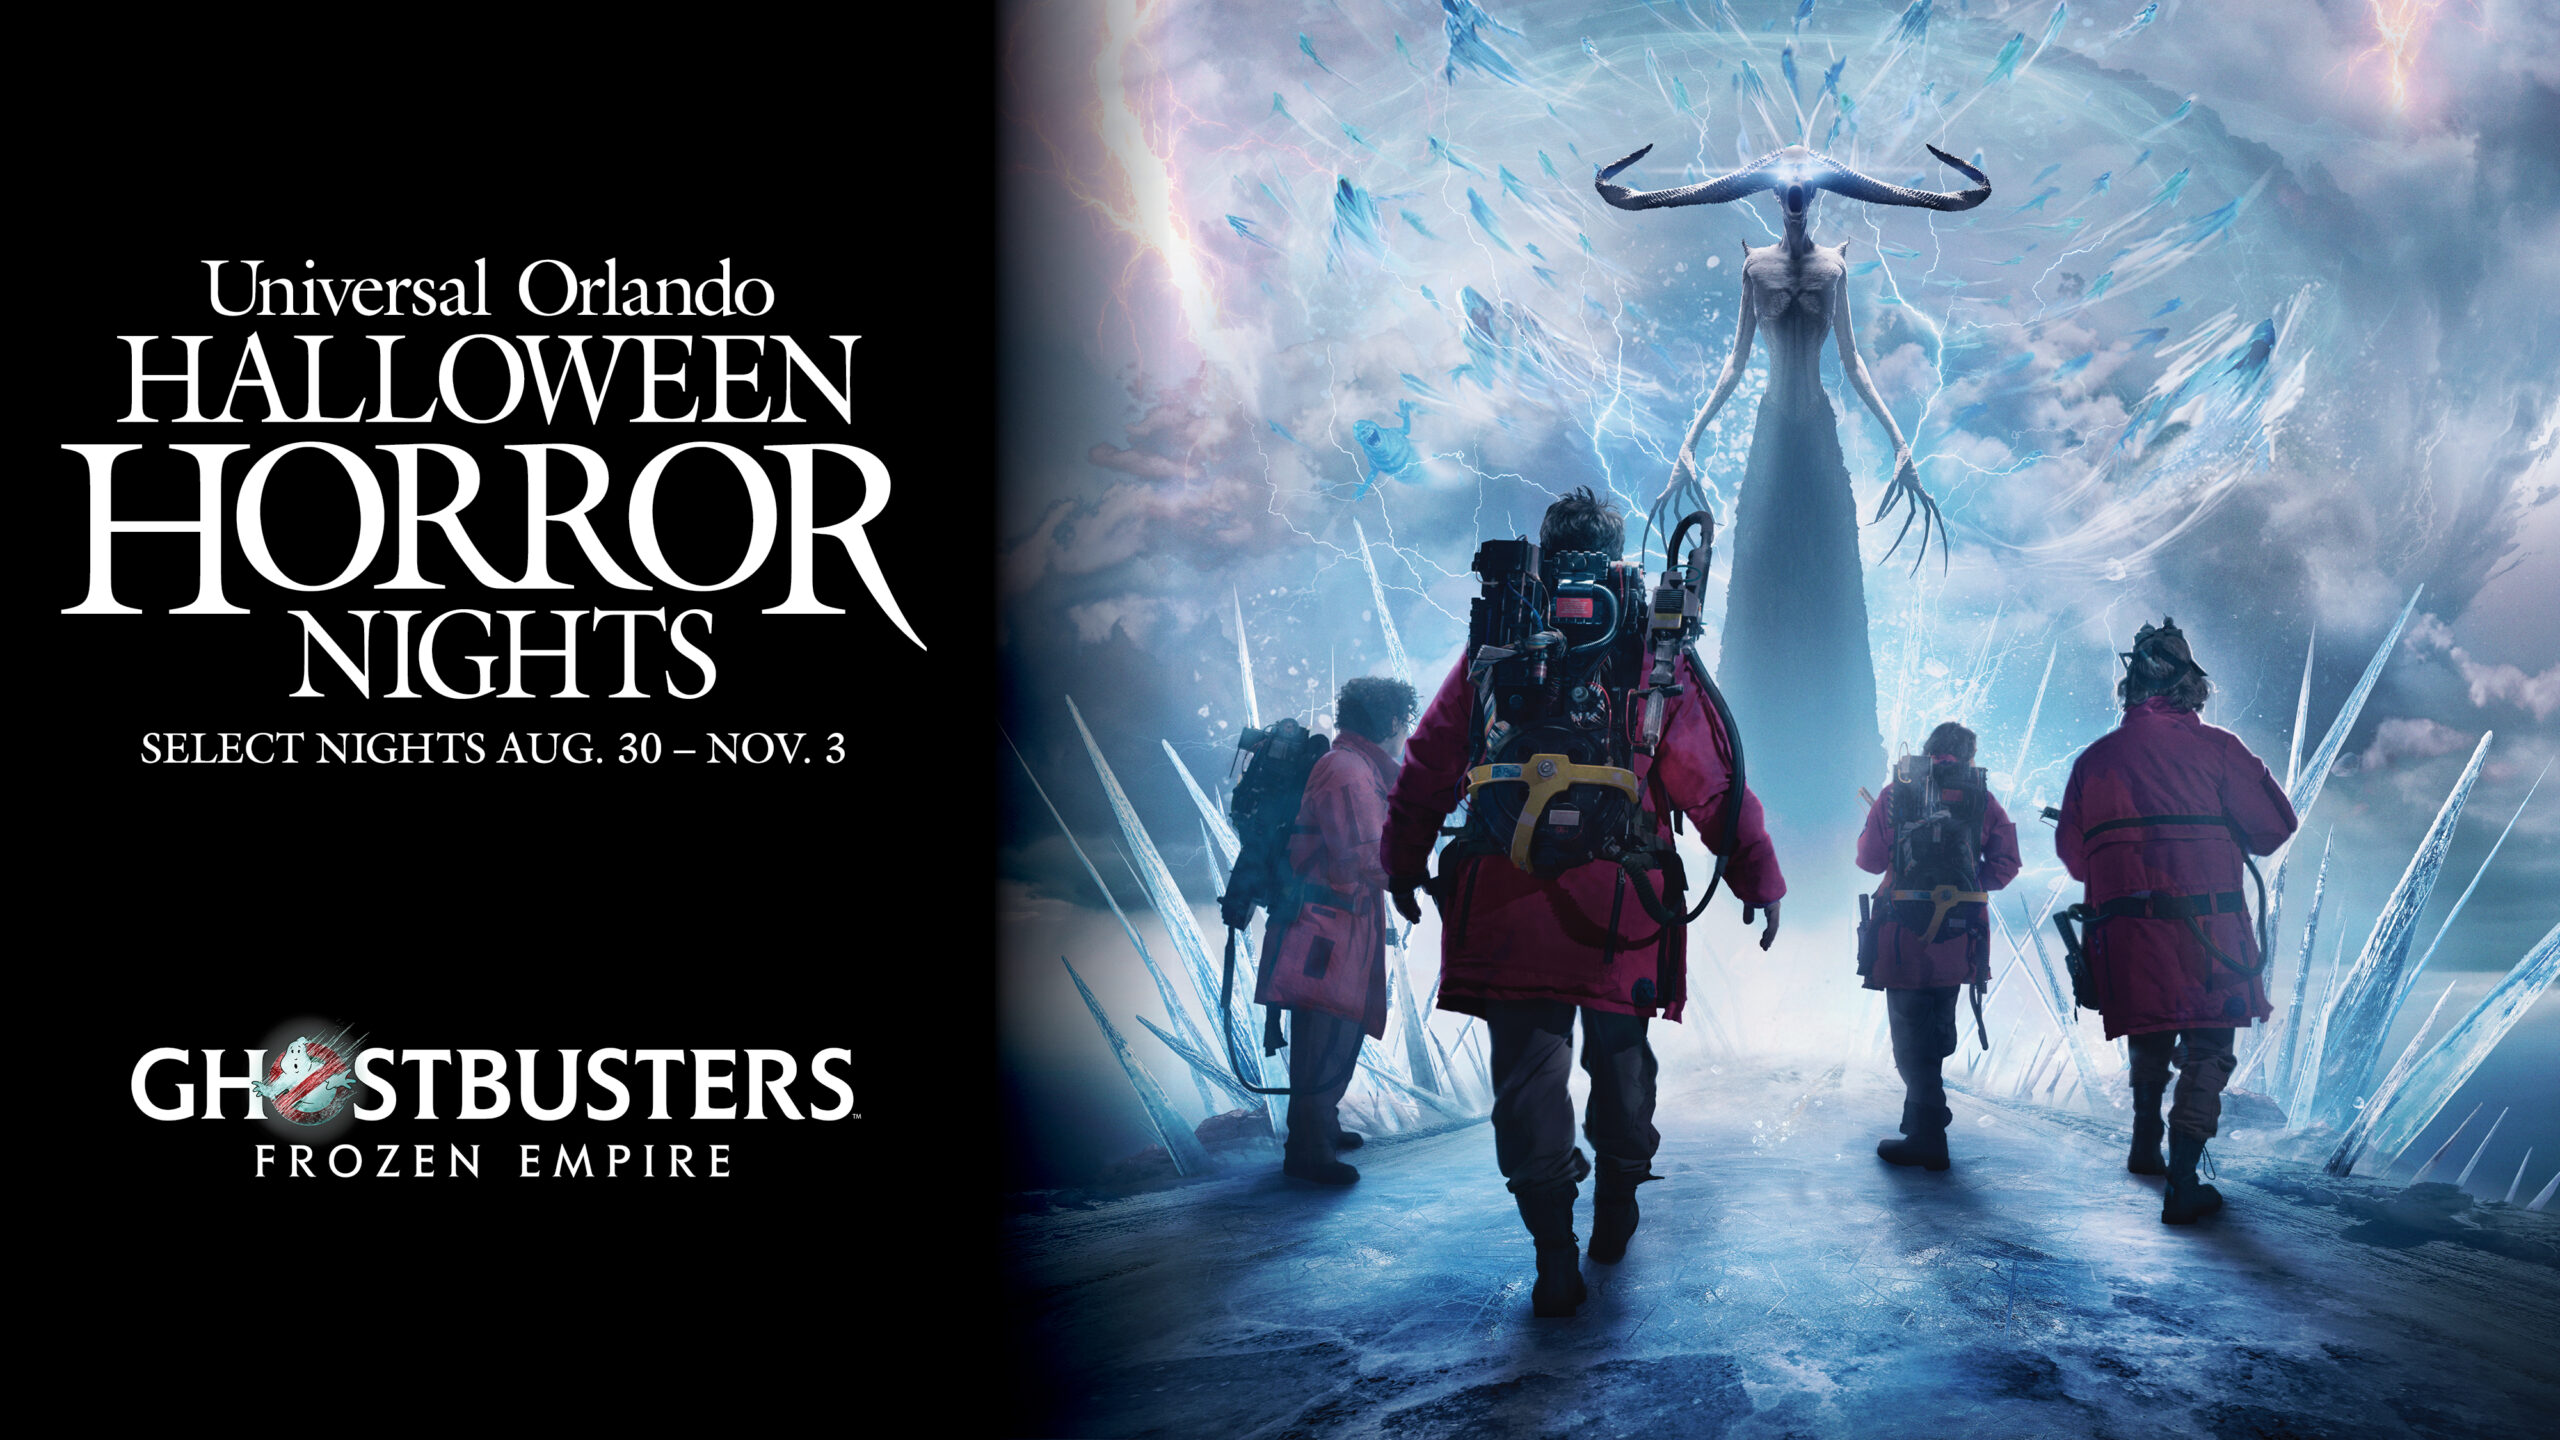 Ghostbusters: Frozen Empire at Halloween Horror Nights 33